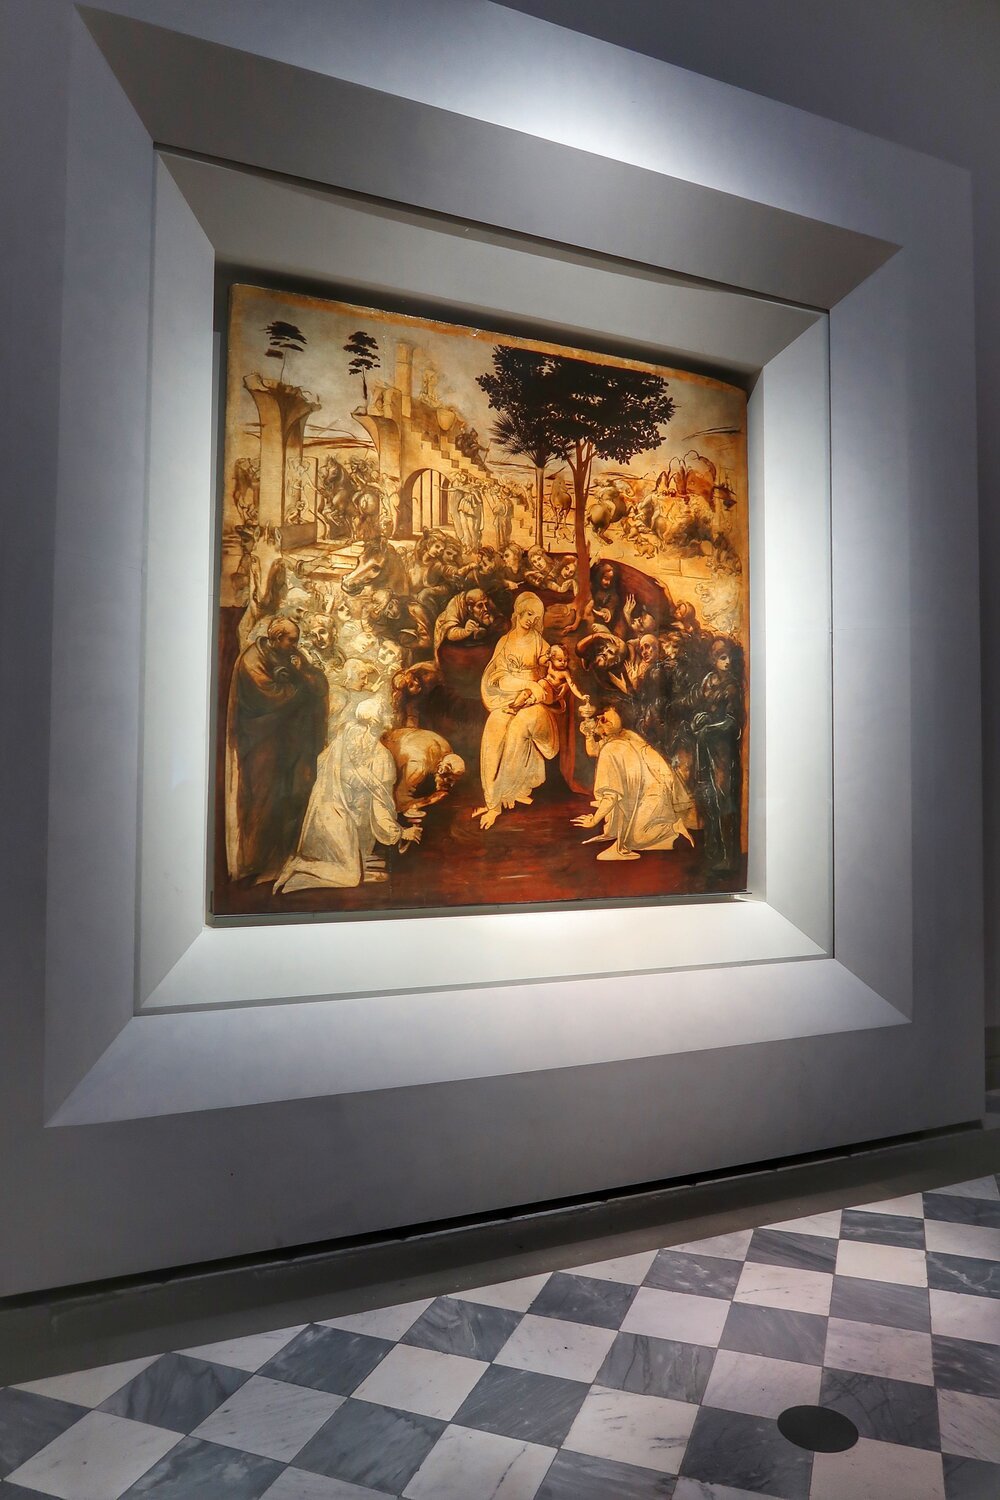 Stunning artwork on display in every corner at the Uffizi Galleries in Florence, Italy.